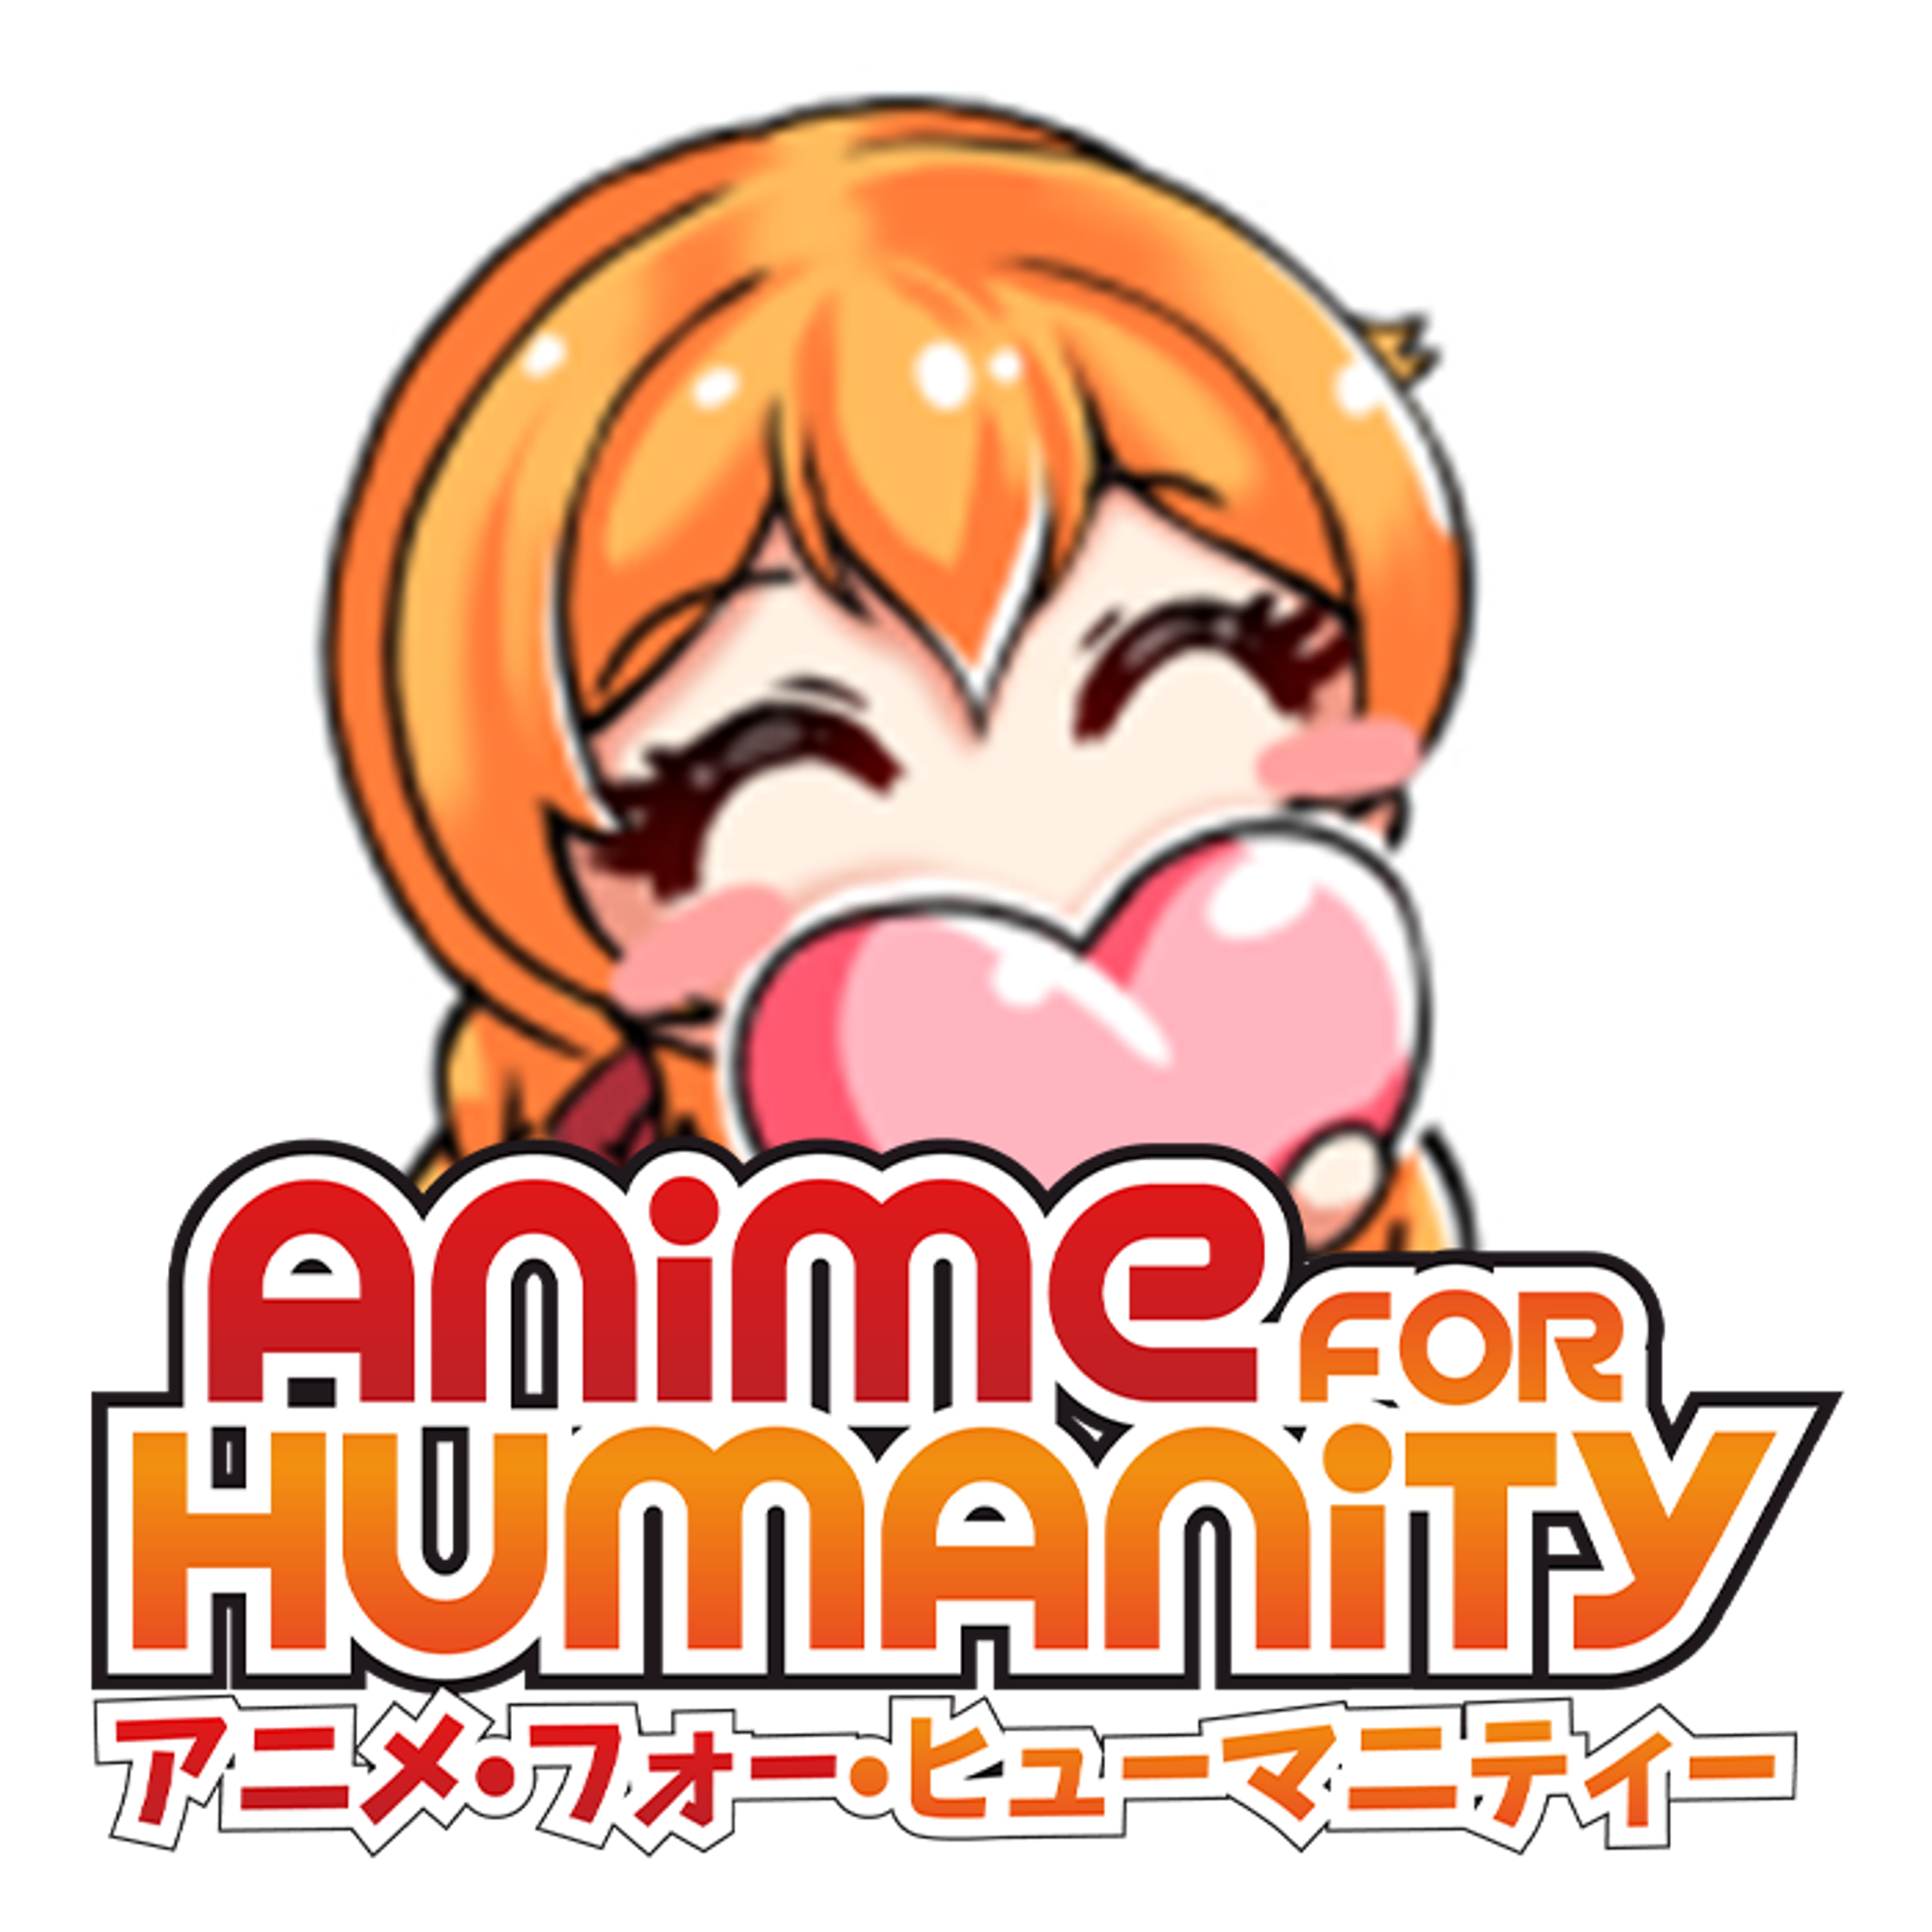 Anime For Humanity